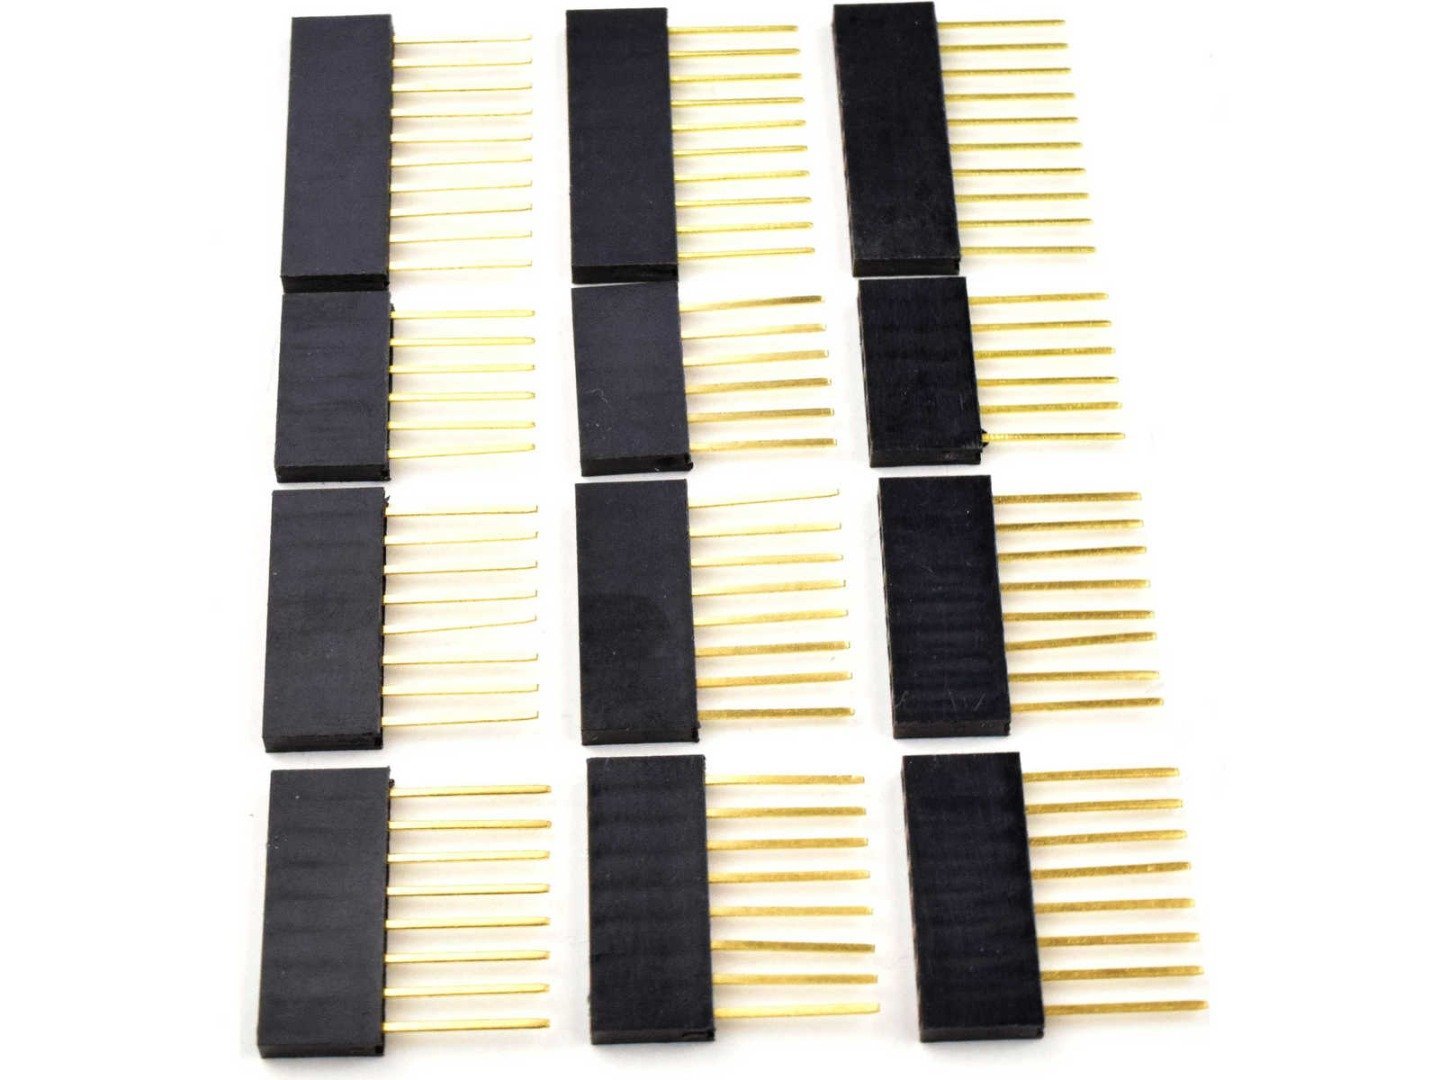 12 pcs Stackable Shield Headers with long leads 11 mm for Arduino prototyping 6